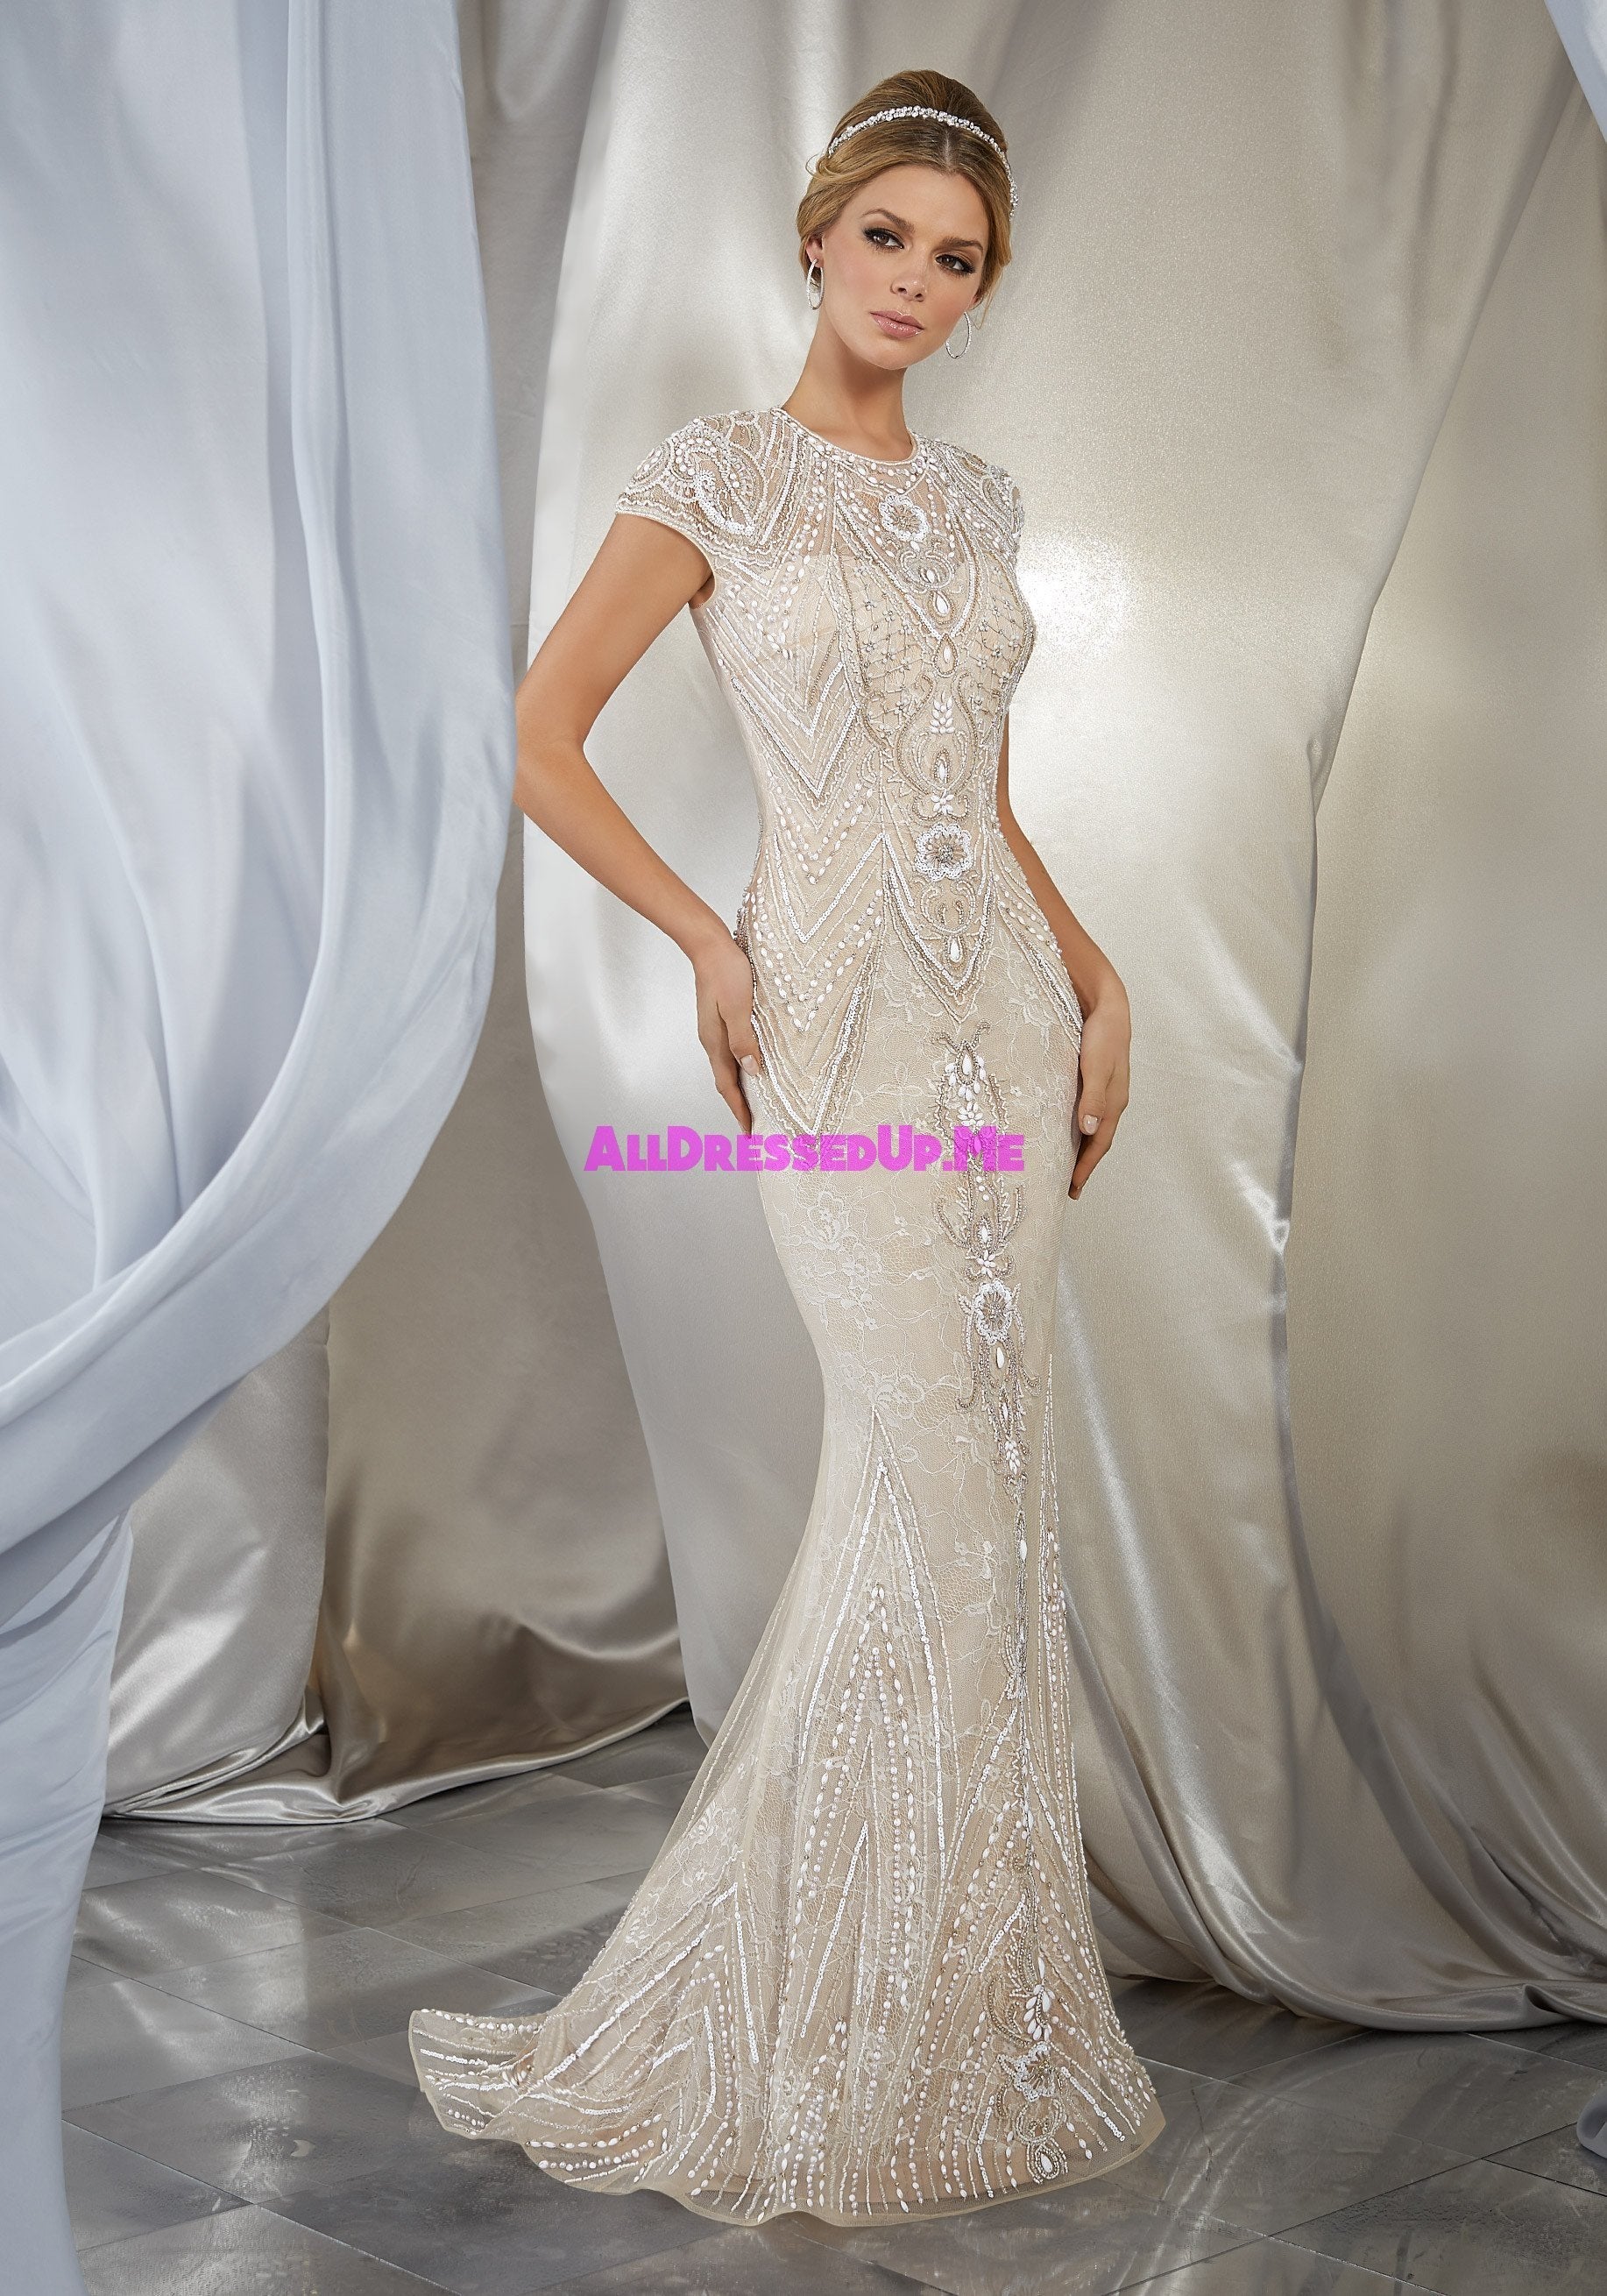 Voyage - Musidora - 6869 - Cheron's Bridal, Wedding Gown - Morilee Voyage - - Wedding Gowns Dresses Chattanooga Hixson Shops Boutiques Tennessee TN Georgia GA MSRP Lowest Prices Sale Discount